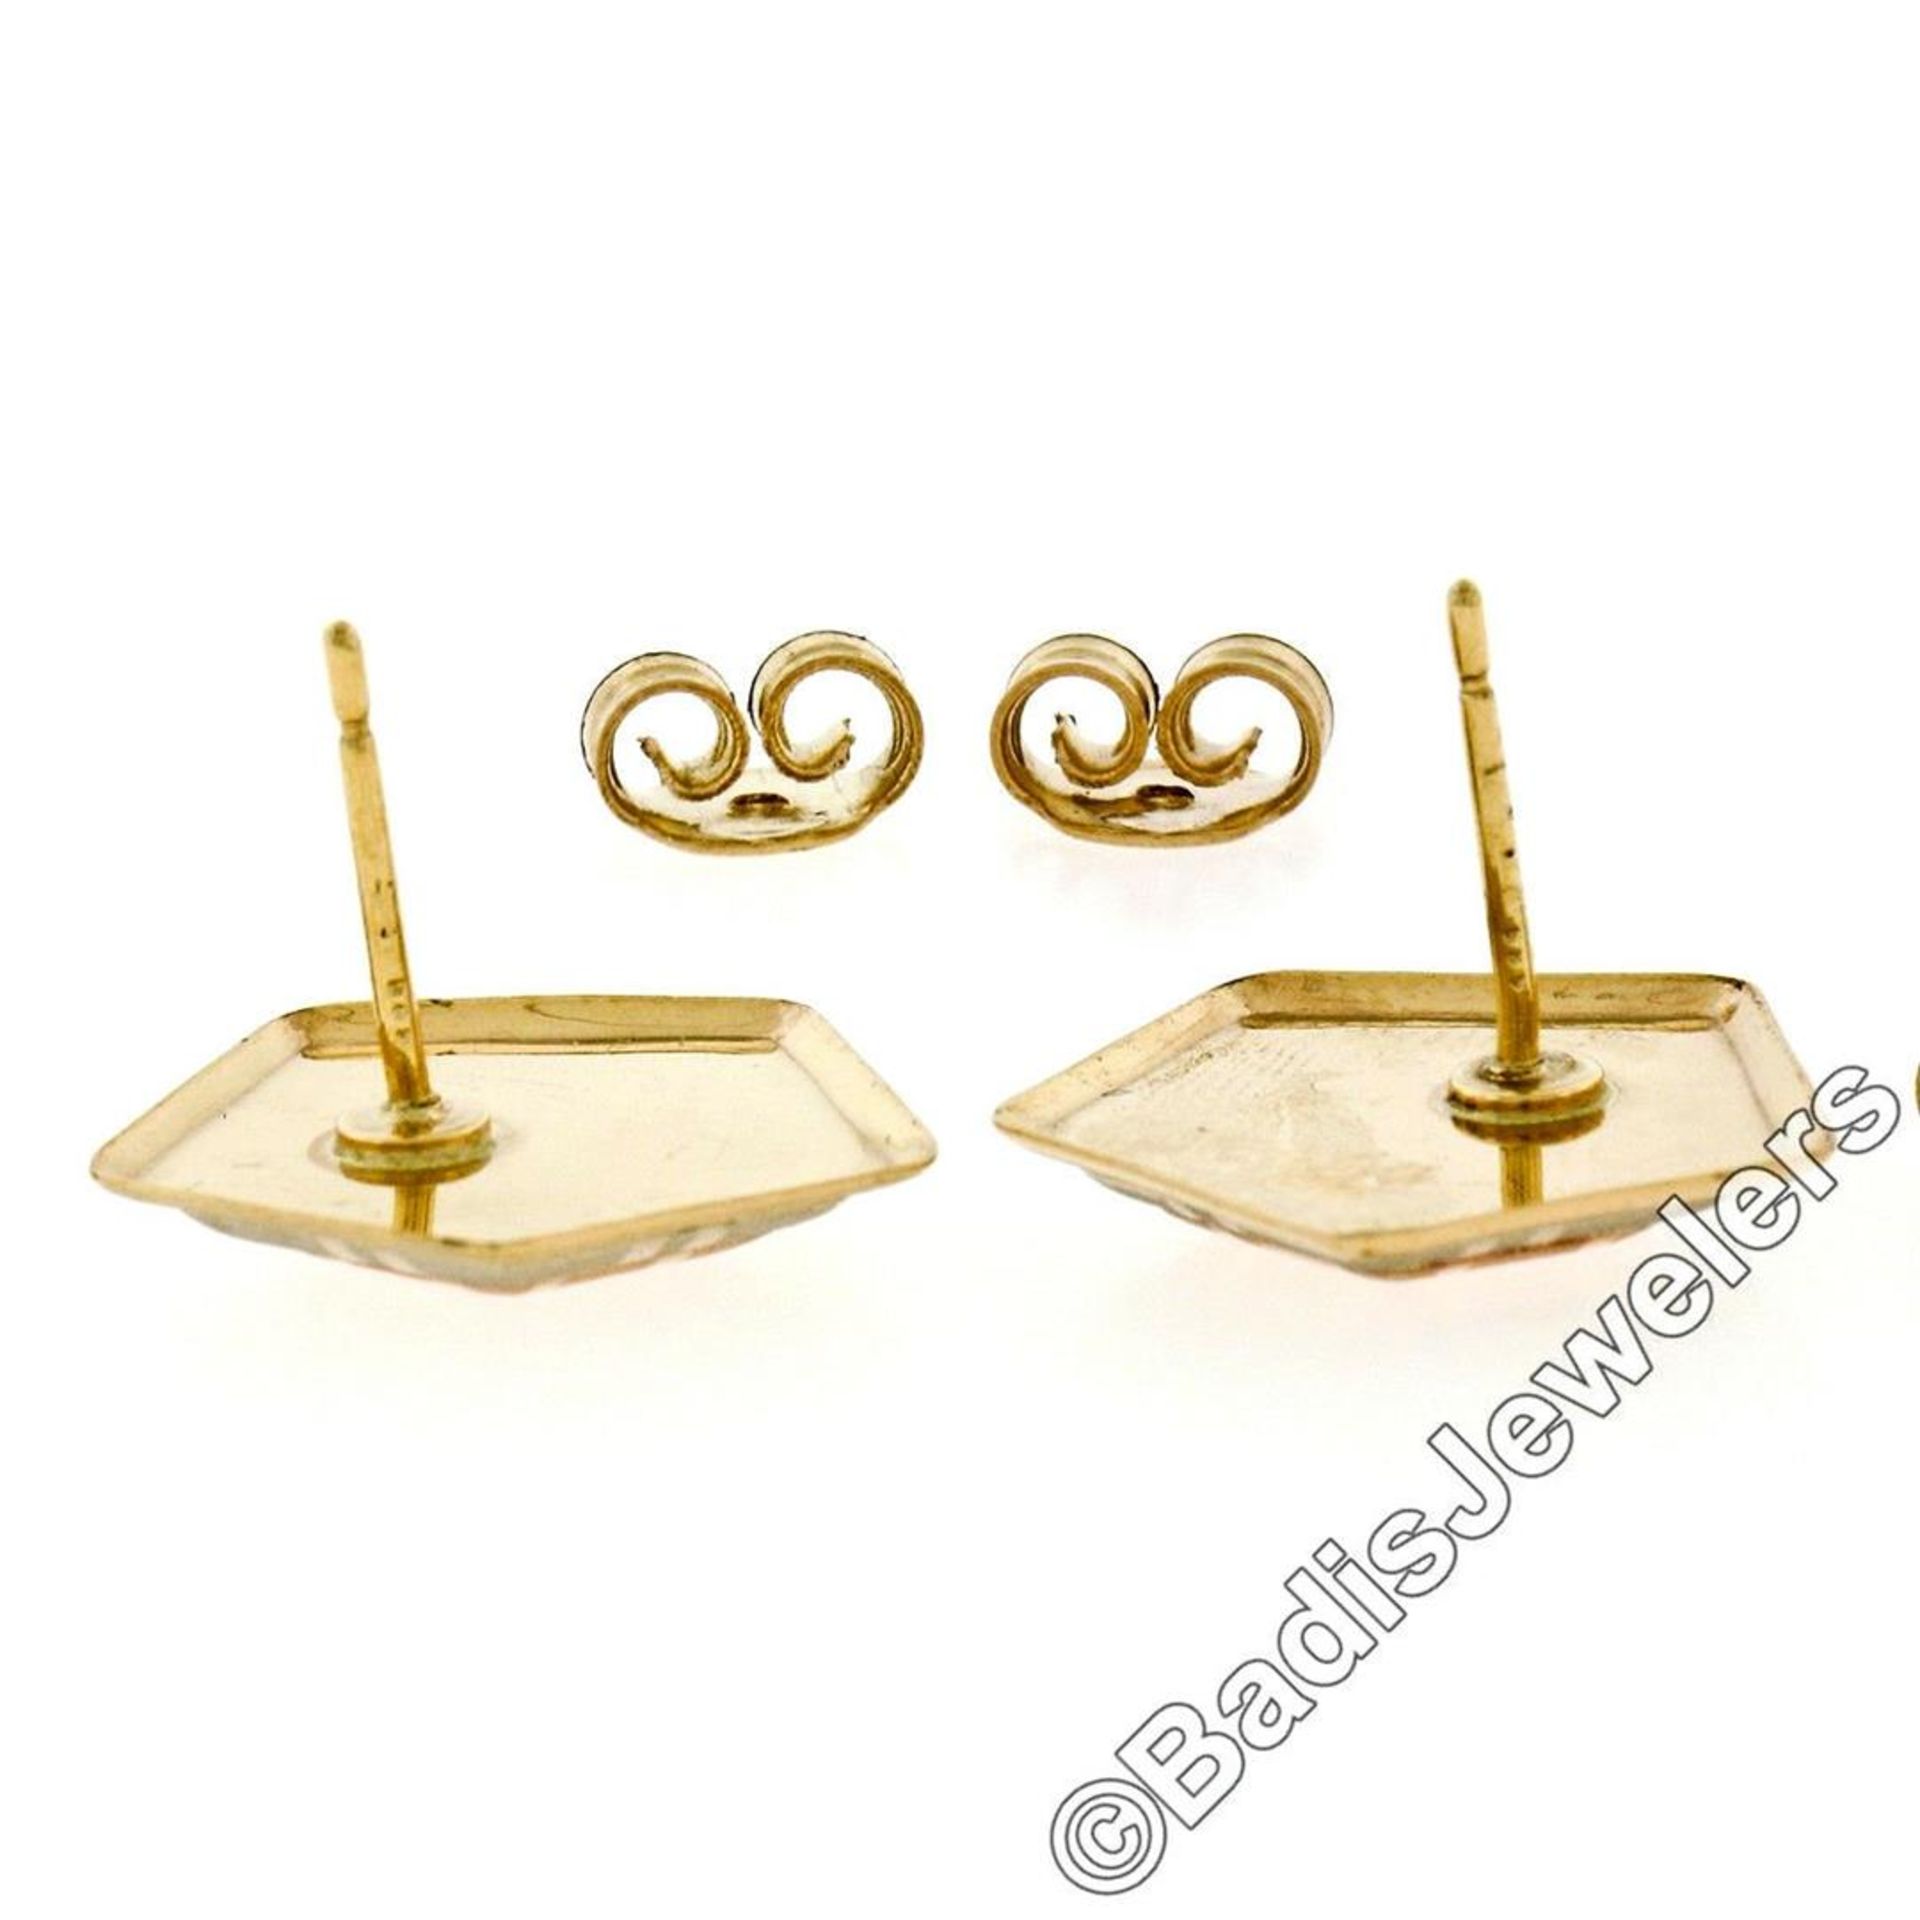 New 14kt Rose, White, and Yellow Gold Stone Finished Tiered Pentagon Stud Earrin - Image 5 of 6